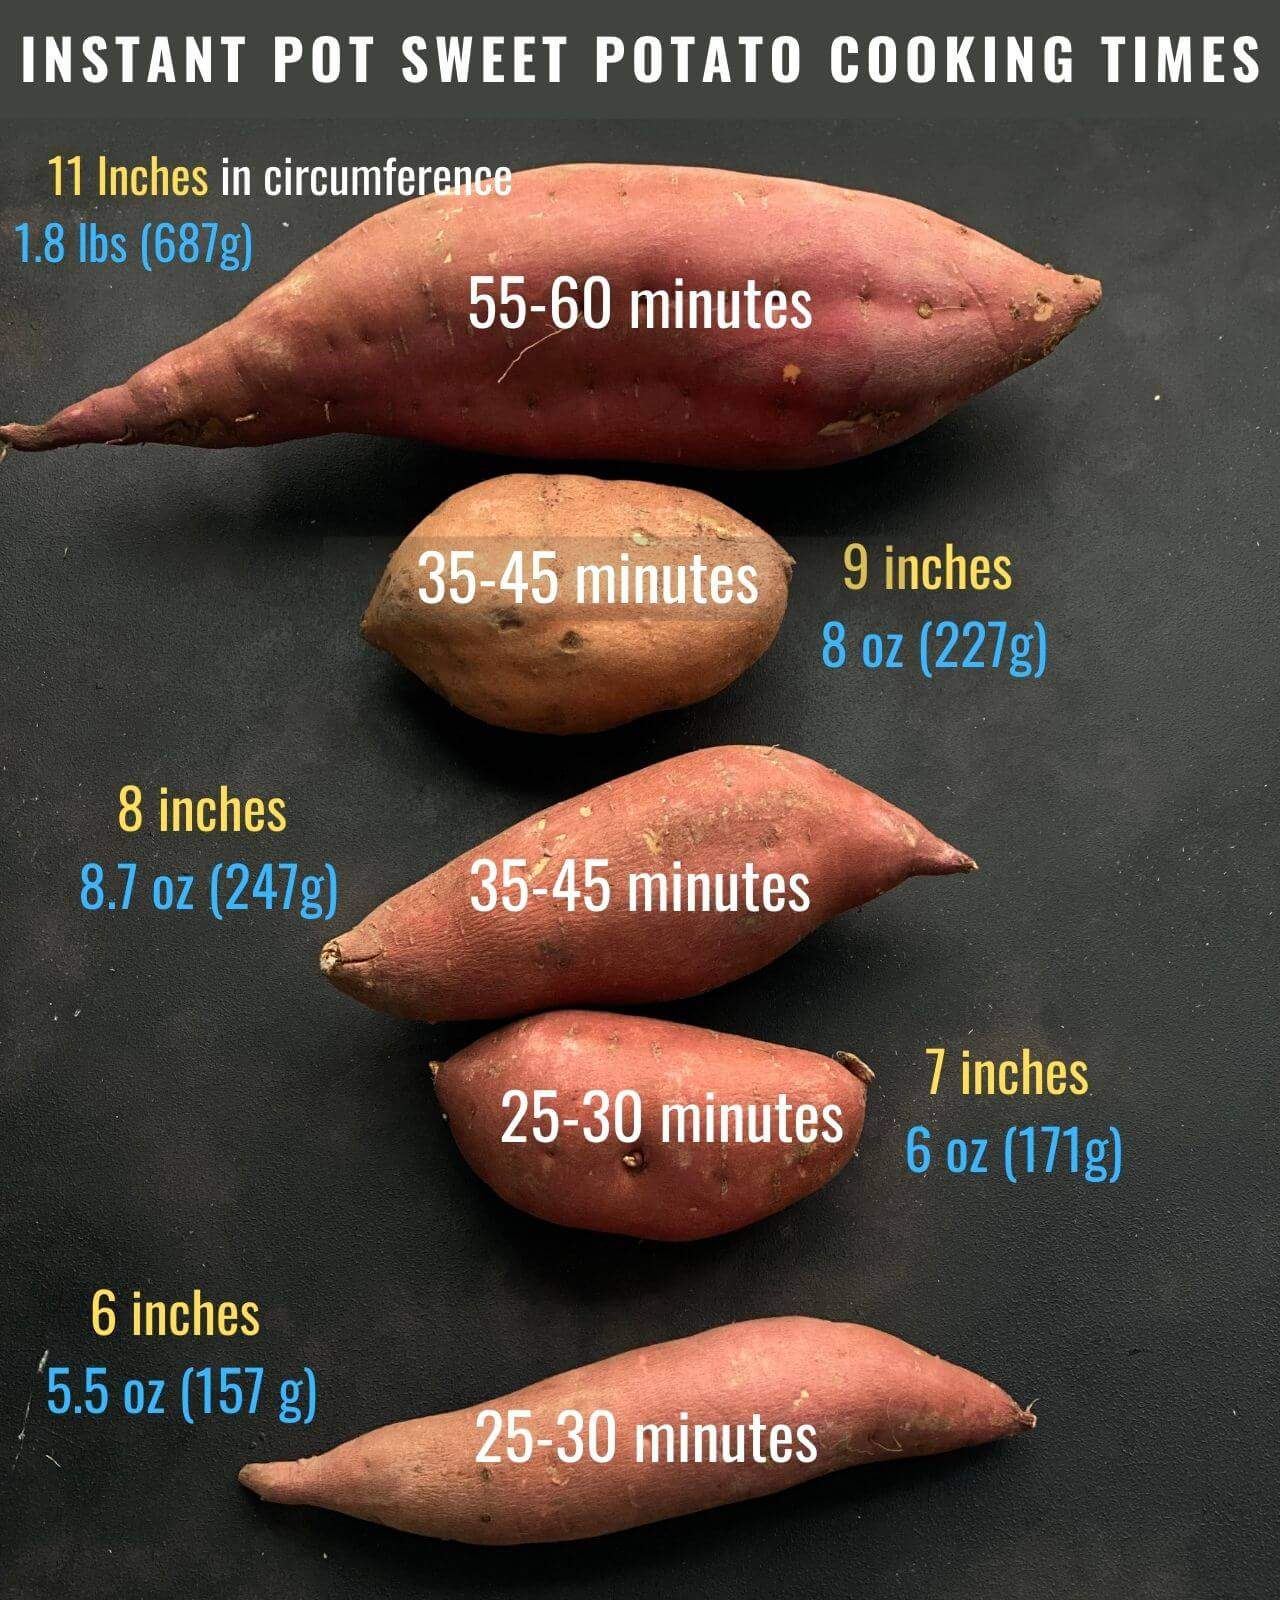 A visual guide of the different sized sweet potatoes from largest at the top and smallest at the bottom.